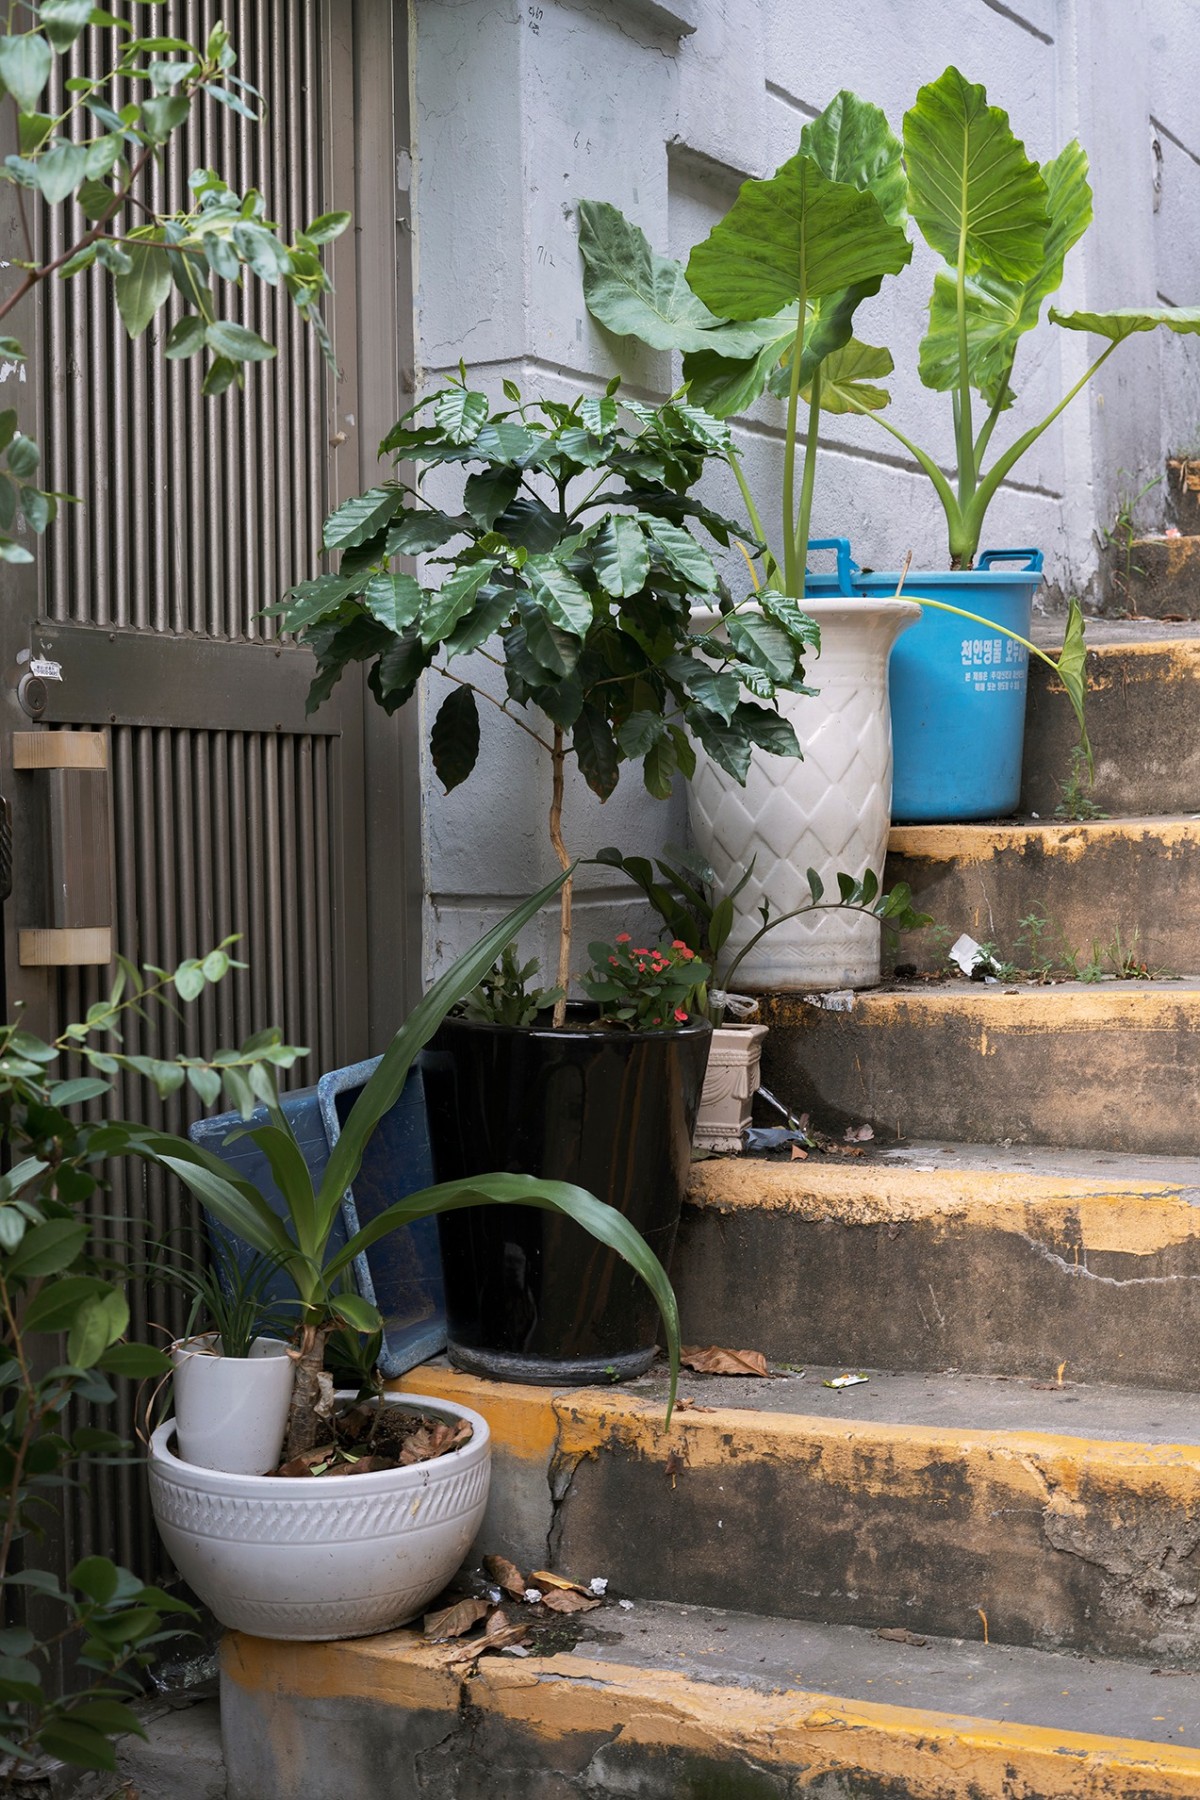 JINYOUNG&nbsp;KIM |&nbsp;SINDANG AREA 9, POTTED PLANTS ON THE STAIRS |&nbsp;C-PRINT MOUNTED ON DIBOND&nbsp;|&nbsp;30&nbsp;X&nbsp;20&nbsp;INCHES |&nbsp;EDITION&nbsp;OF 5 |&nbsp;2019